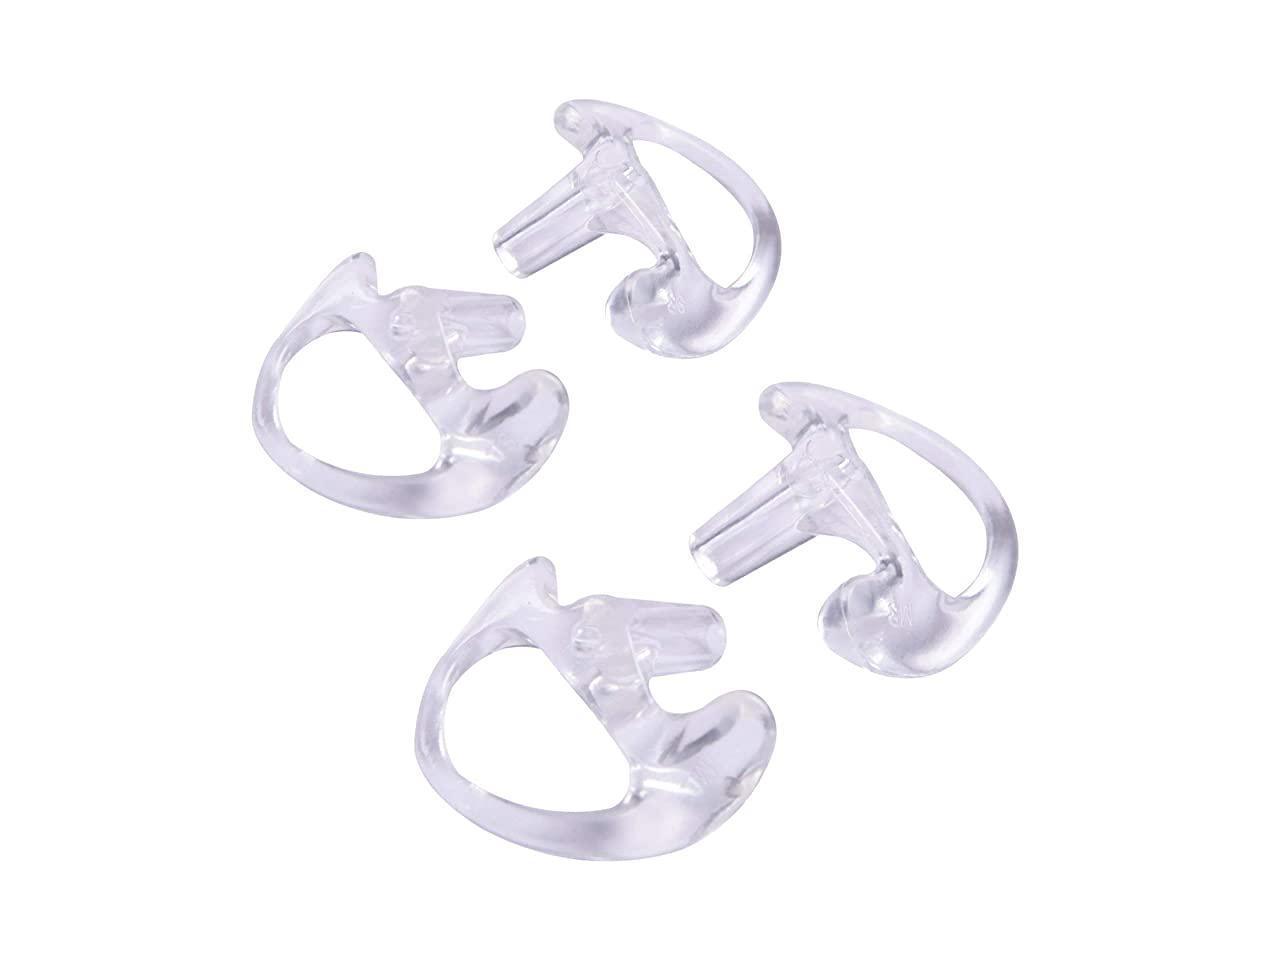 S/M/L Two Way Radio Ear Mold Earpiece Soft Insert for Acoustic Coil Tube Earbud 